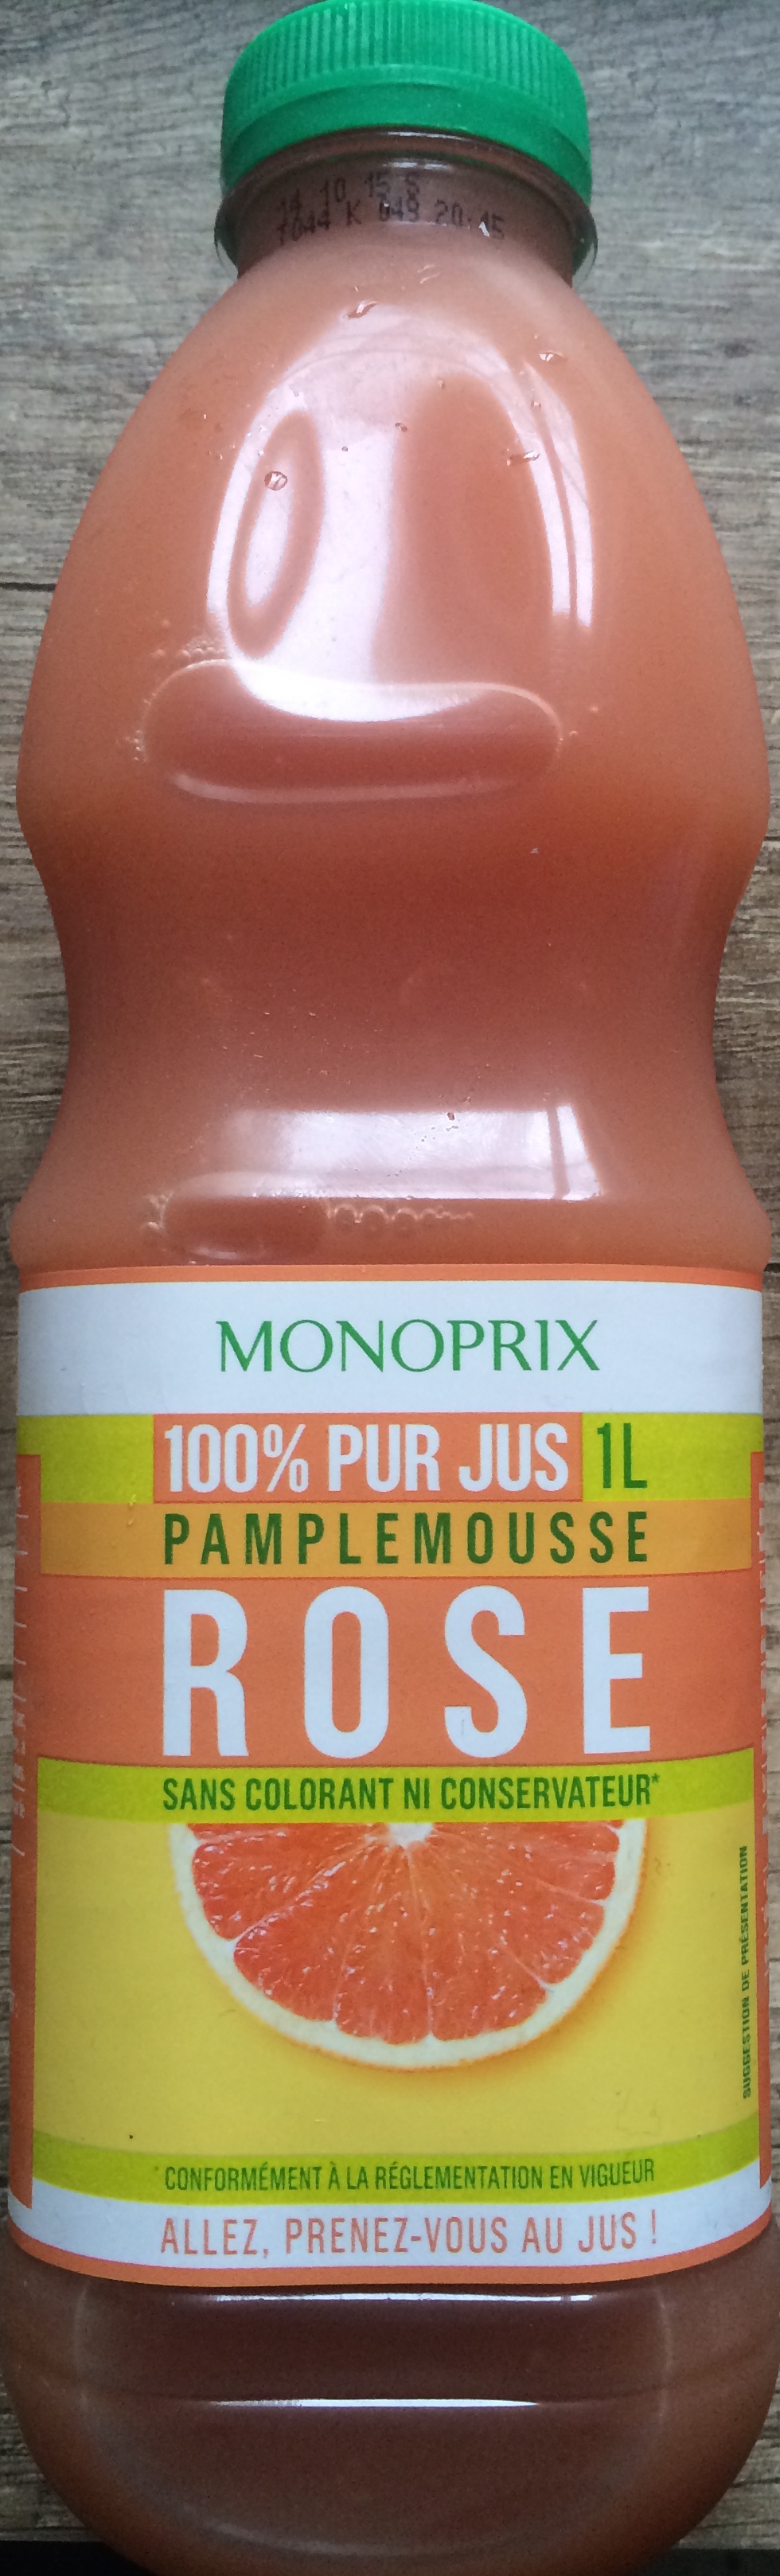 100 % Pur Jus Pamplemousse Rose - Product - fr